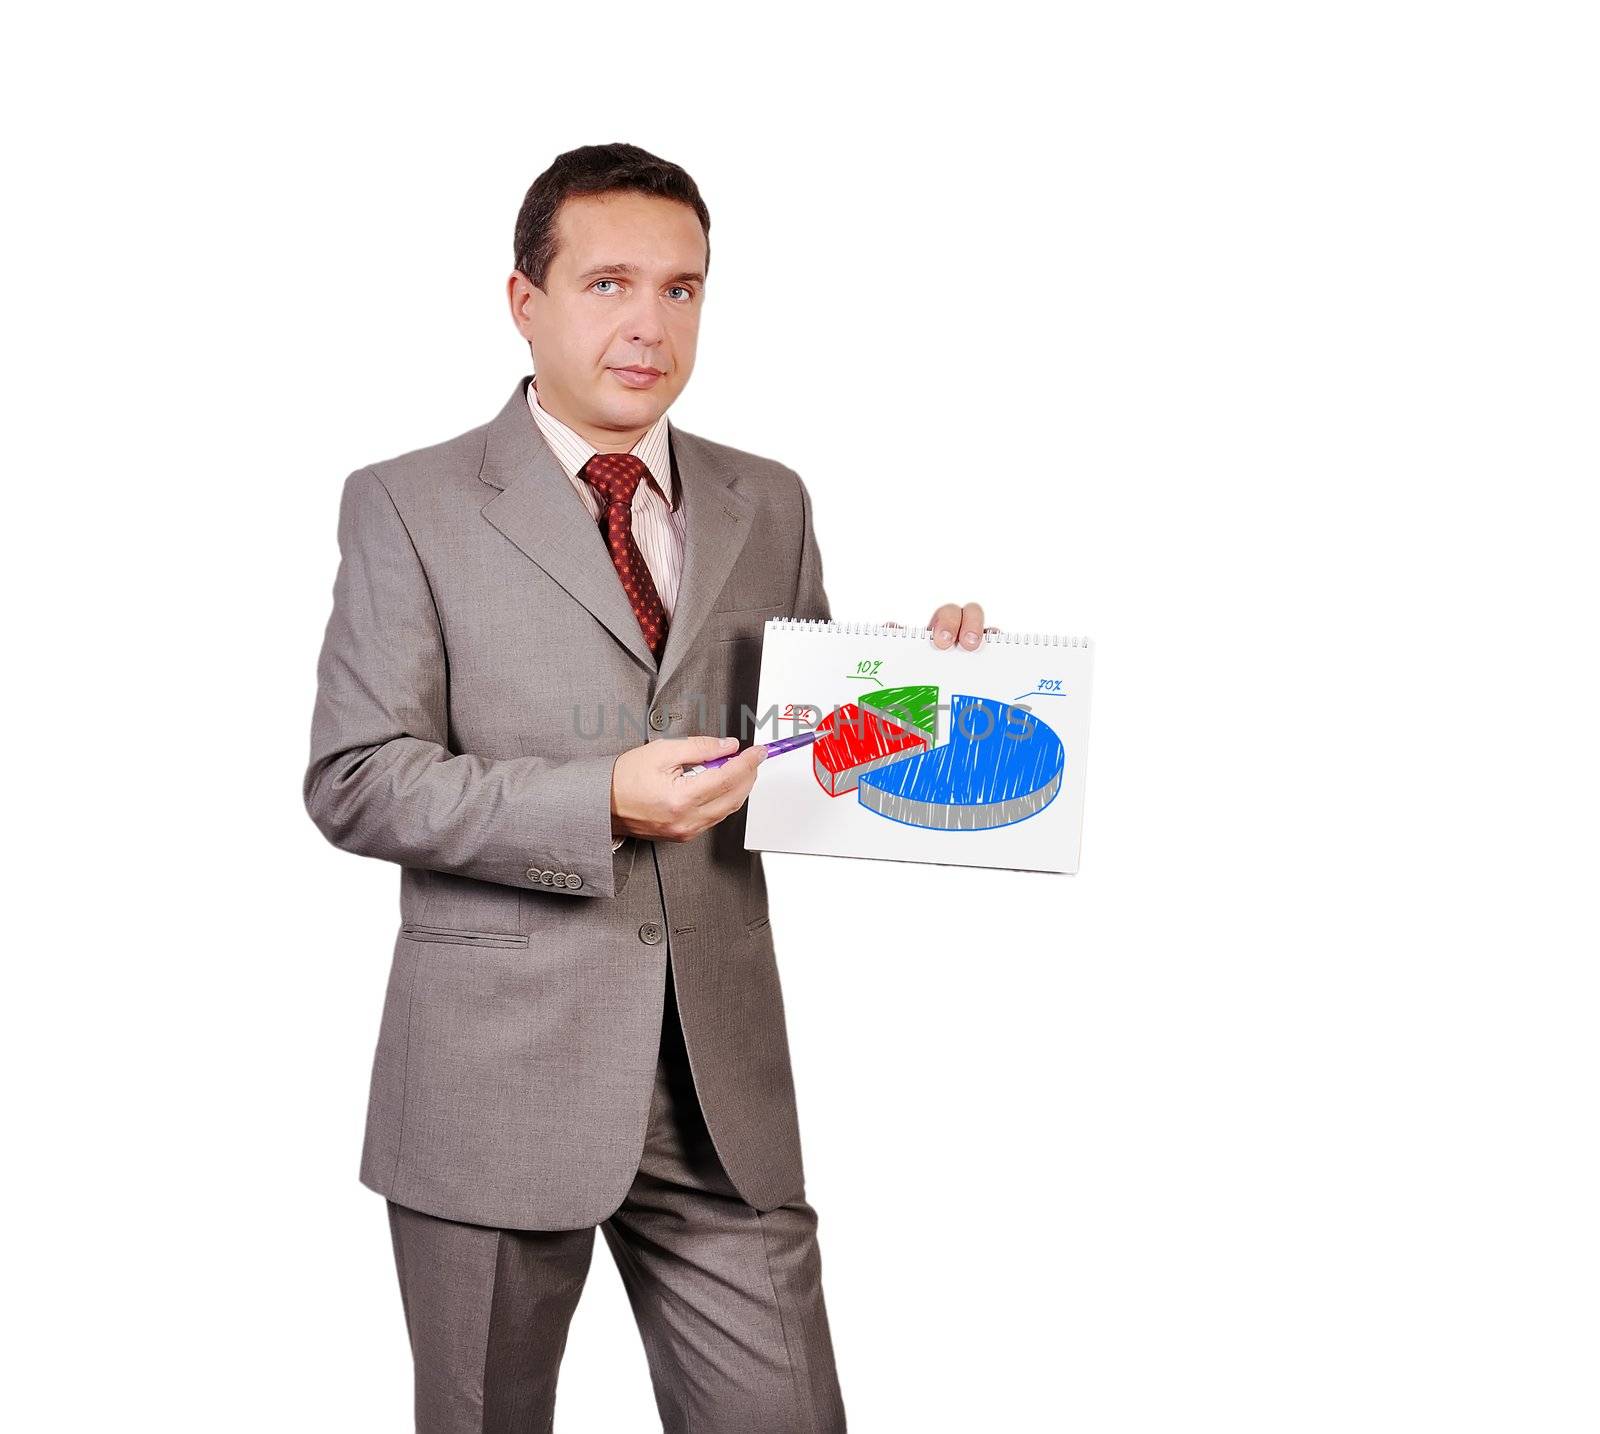 businessman holding a placard with pie chart